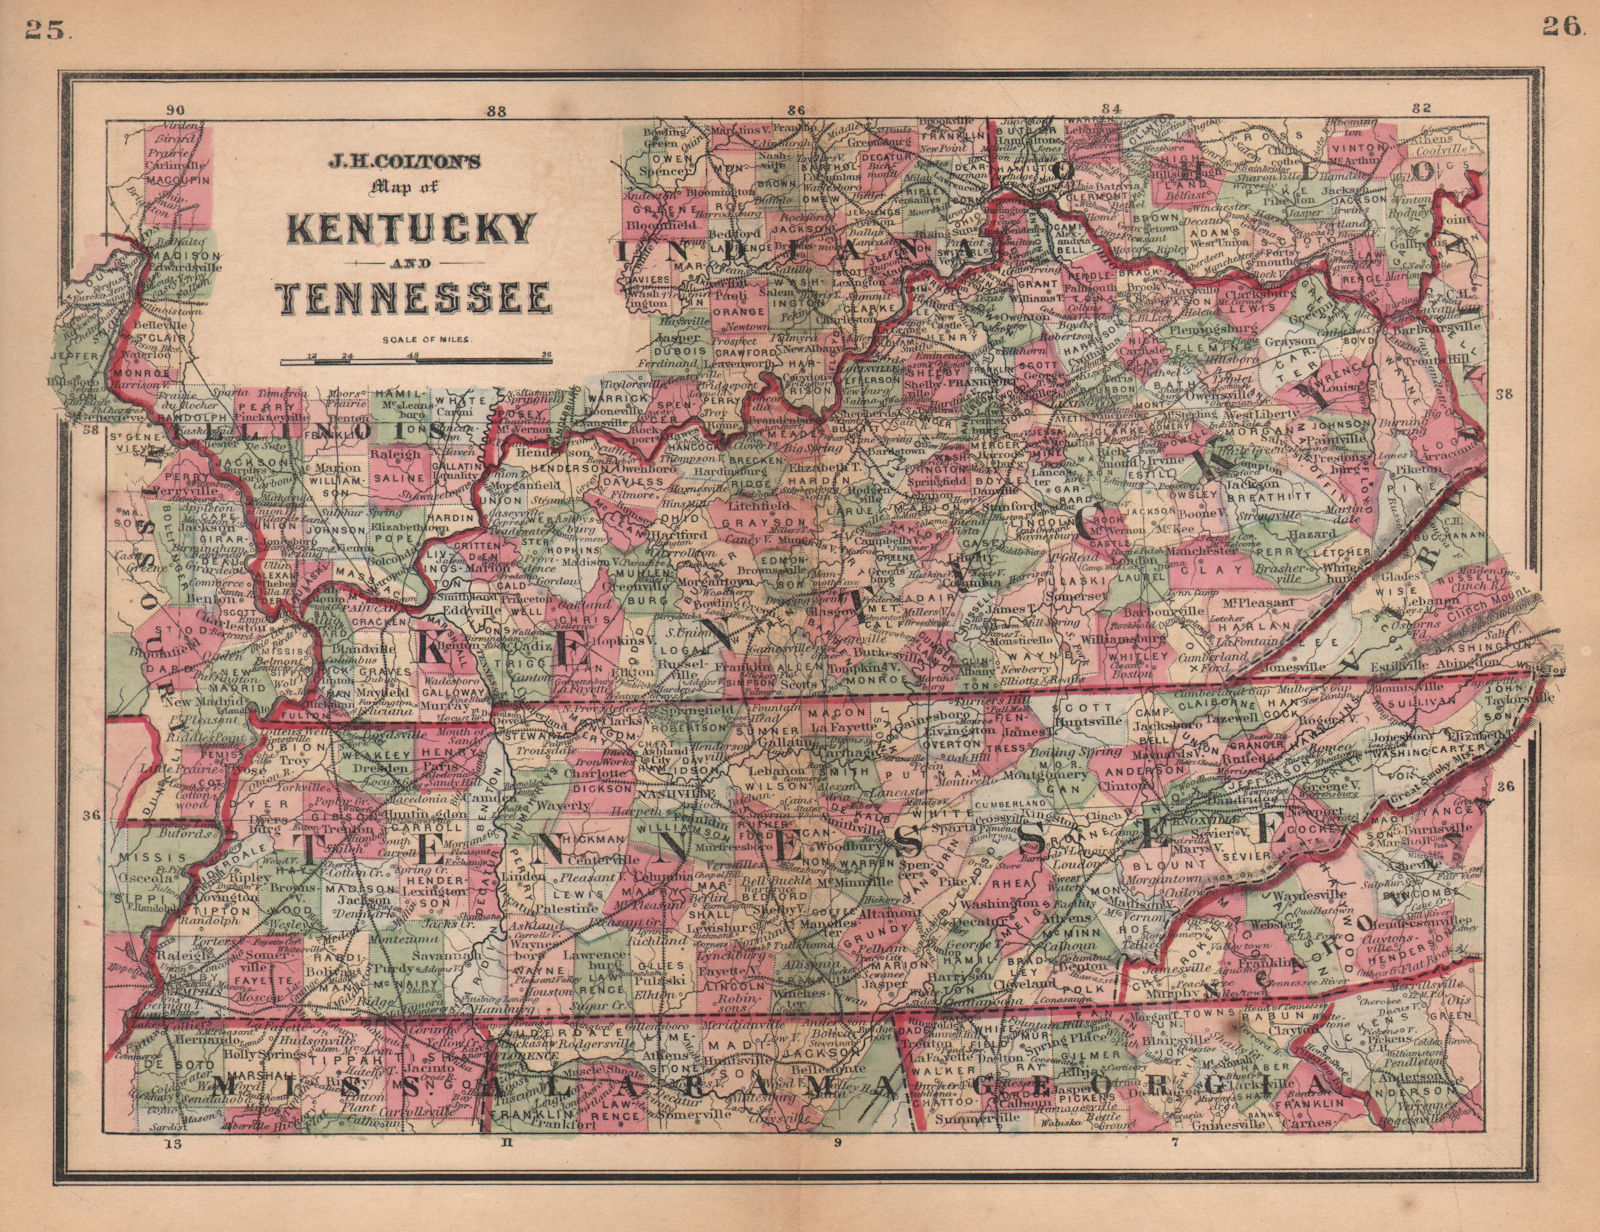 Associate Product J. H. Colton's map of Kentucky and Tennessee 1864 old antique plan chart